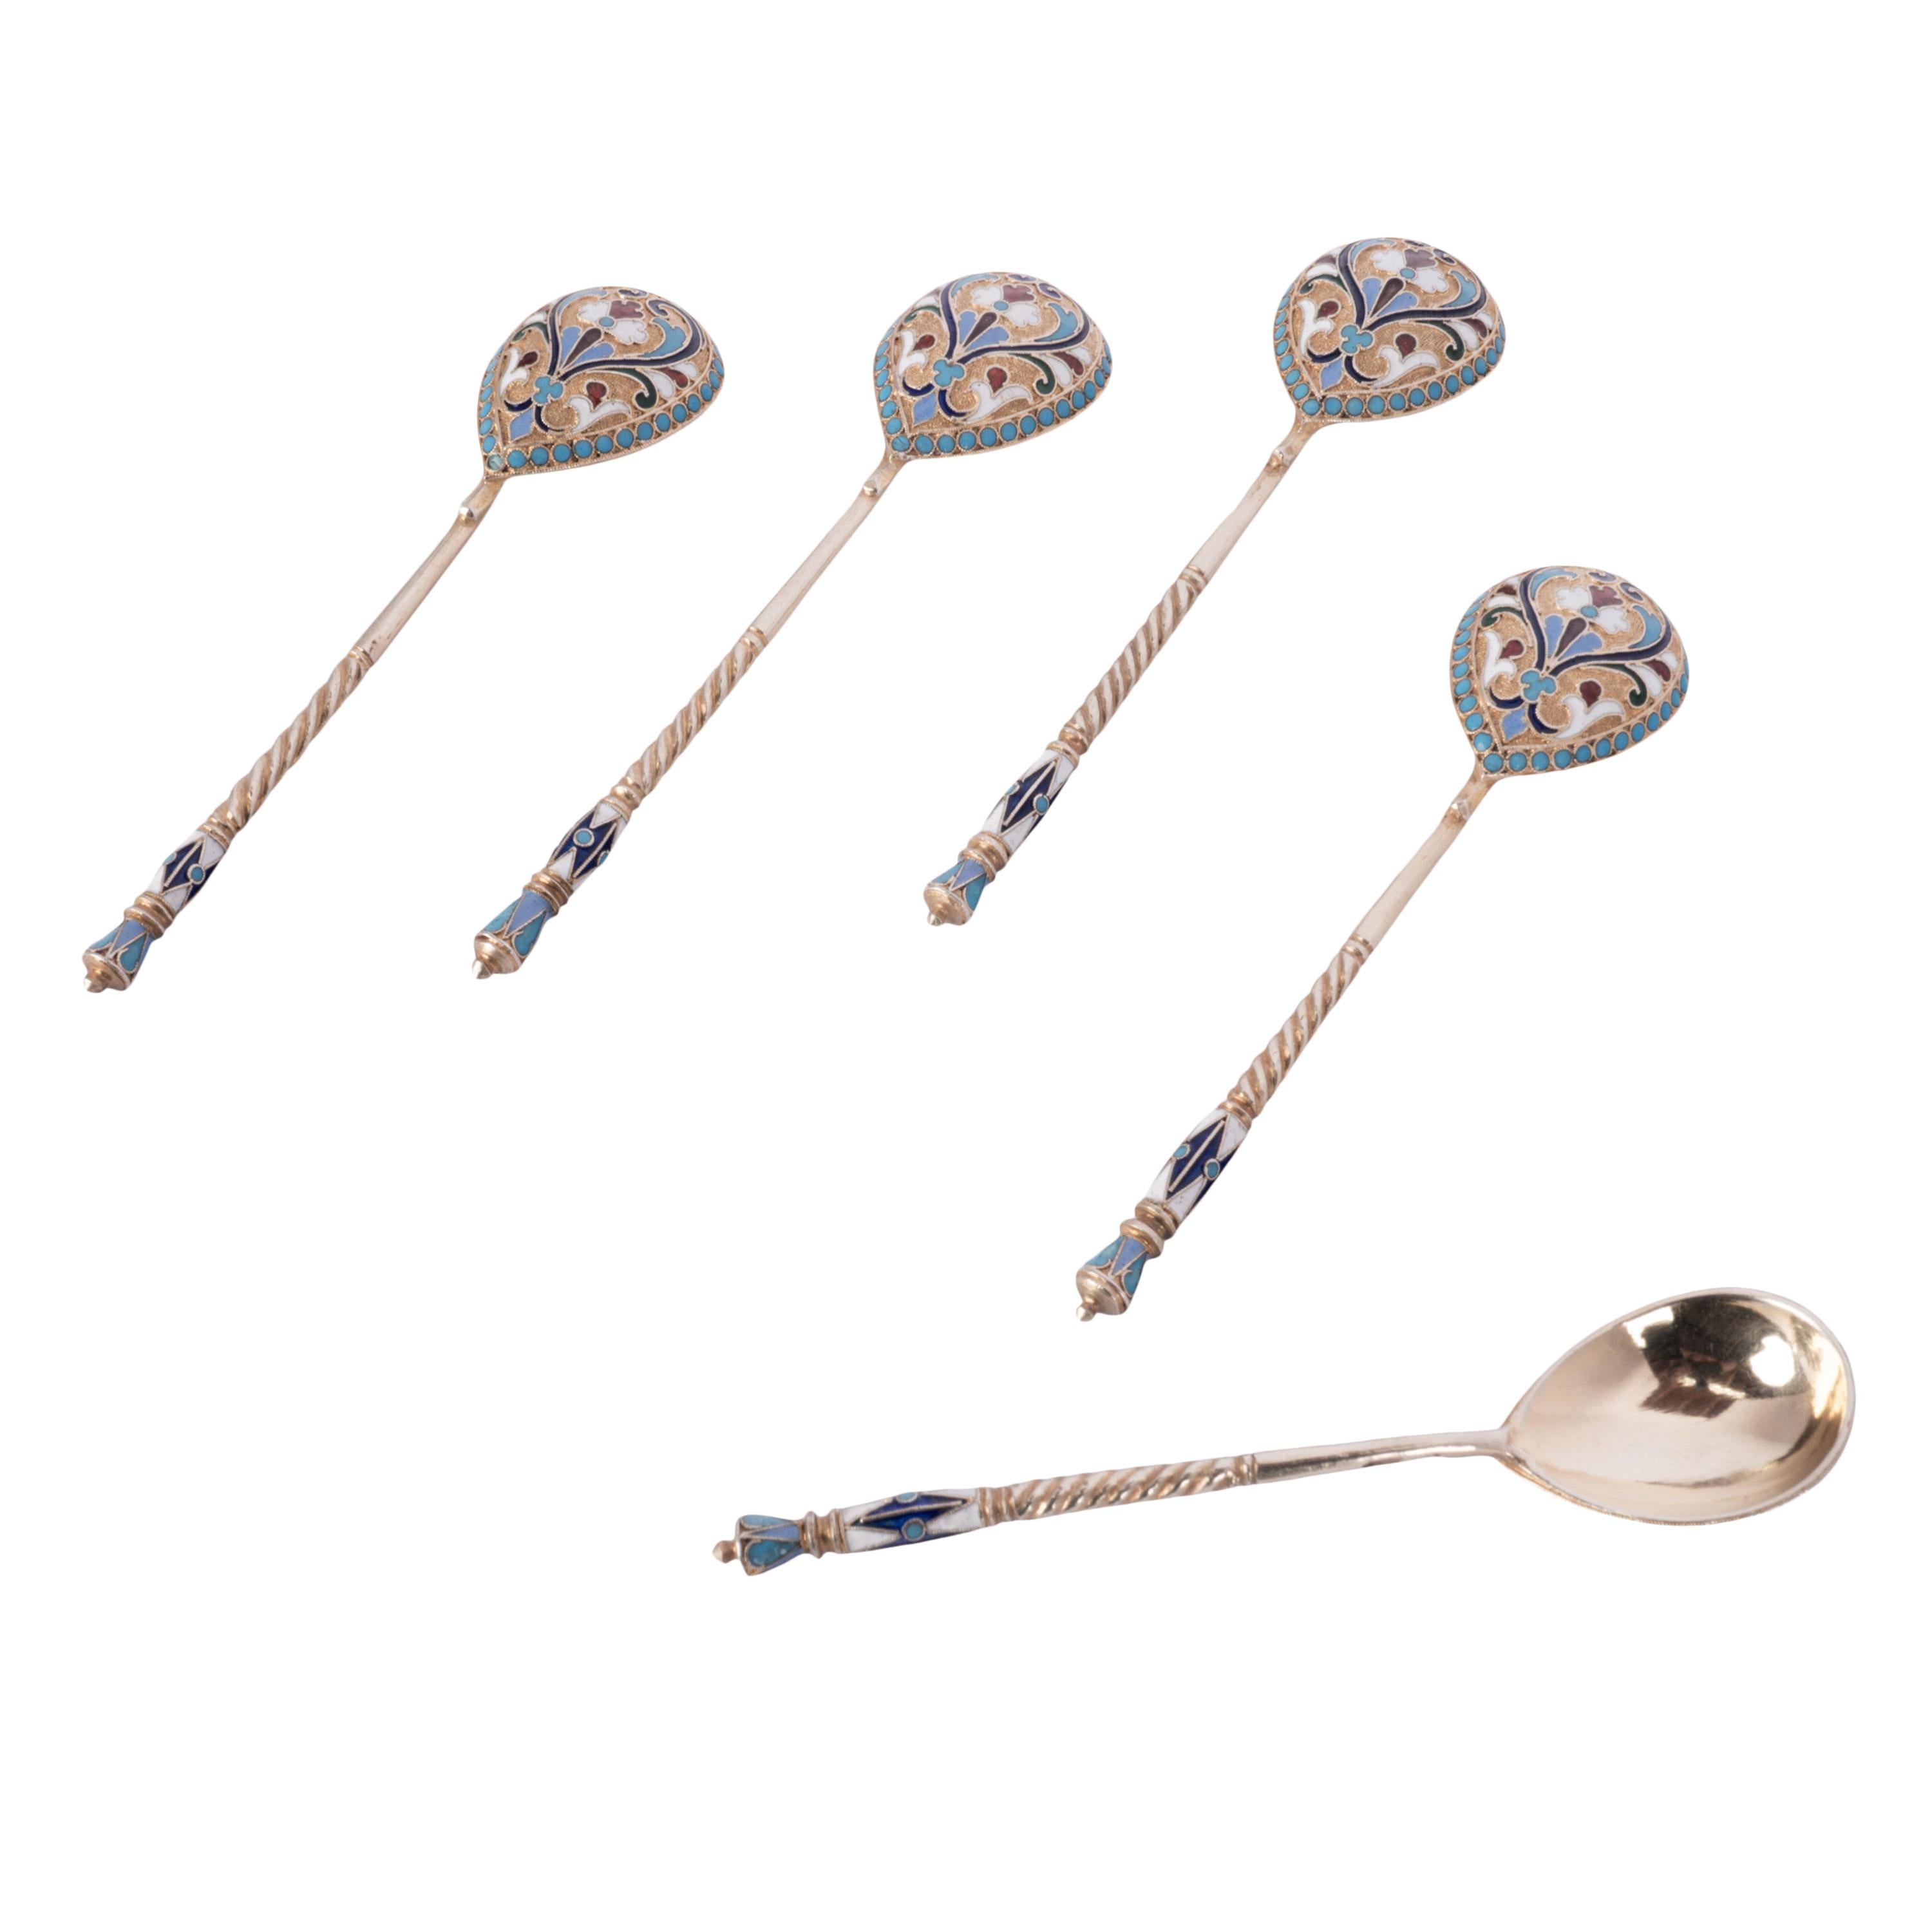 Antique Set Imperial Russian Silver Gilt Cloisonne Spoons Feodosii Pekin Moscow For Sale 2